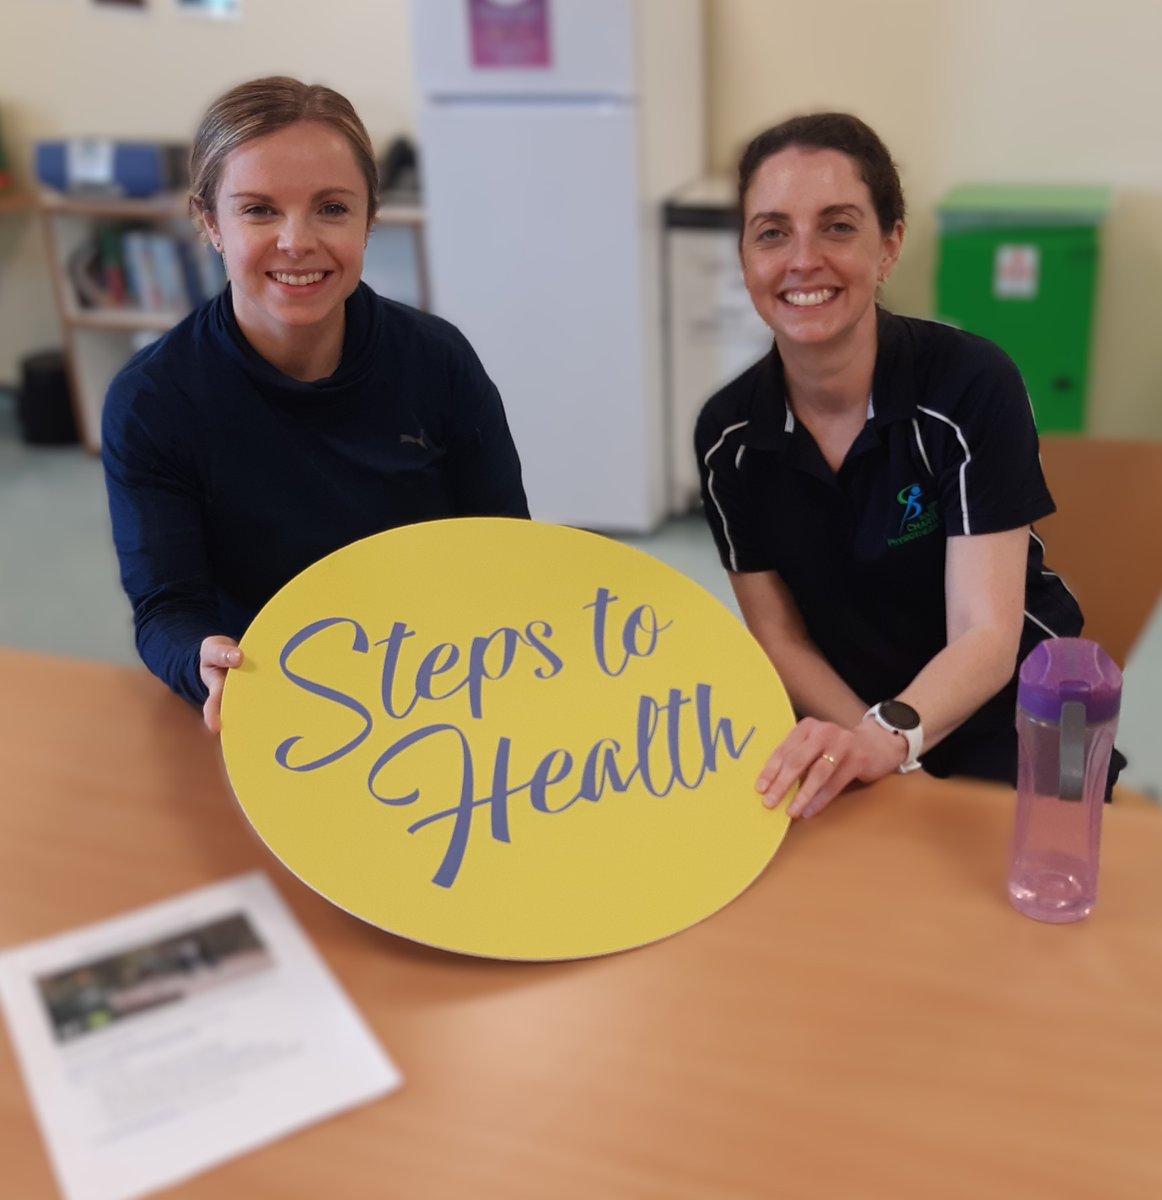 A great day was has at the Steps to Health Launch in Carlow, thanks to Vivienne McMahon. Registration closes this Friday so if you have not yet votes then go to hse.ie/stepschallenge to get signed up before the 3rd May. @SouthEastCH